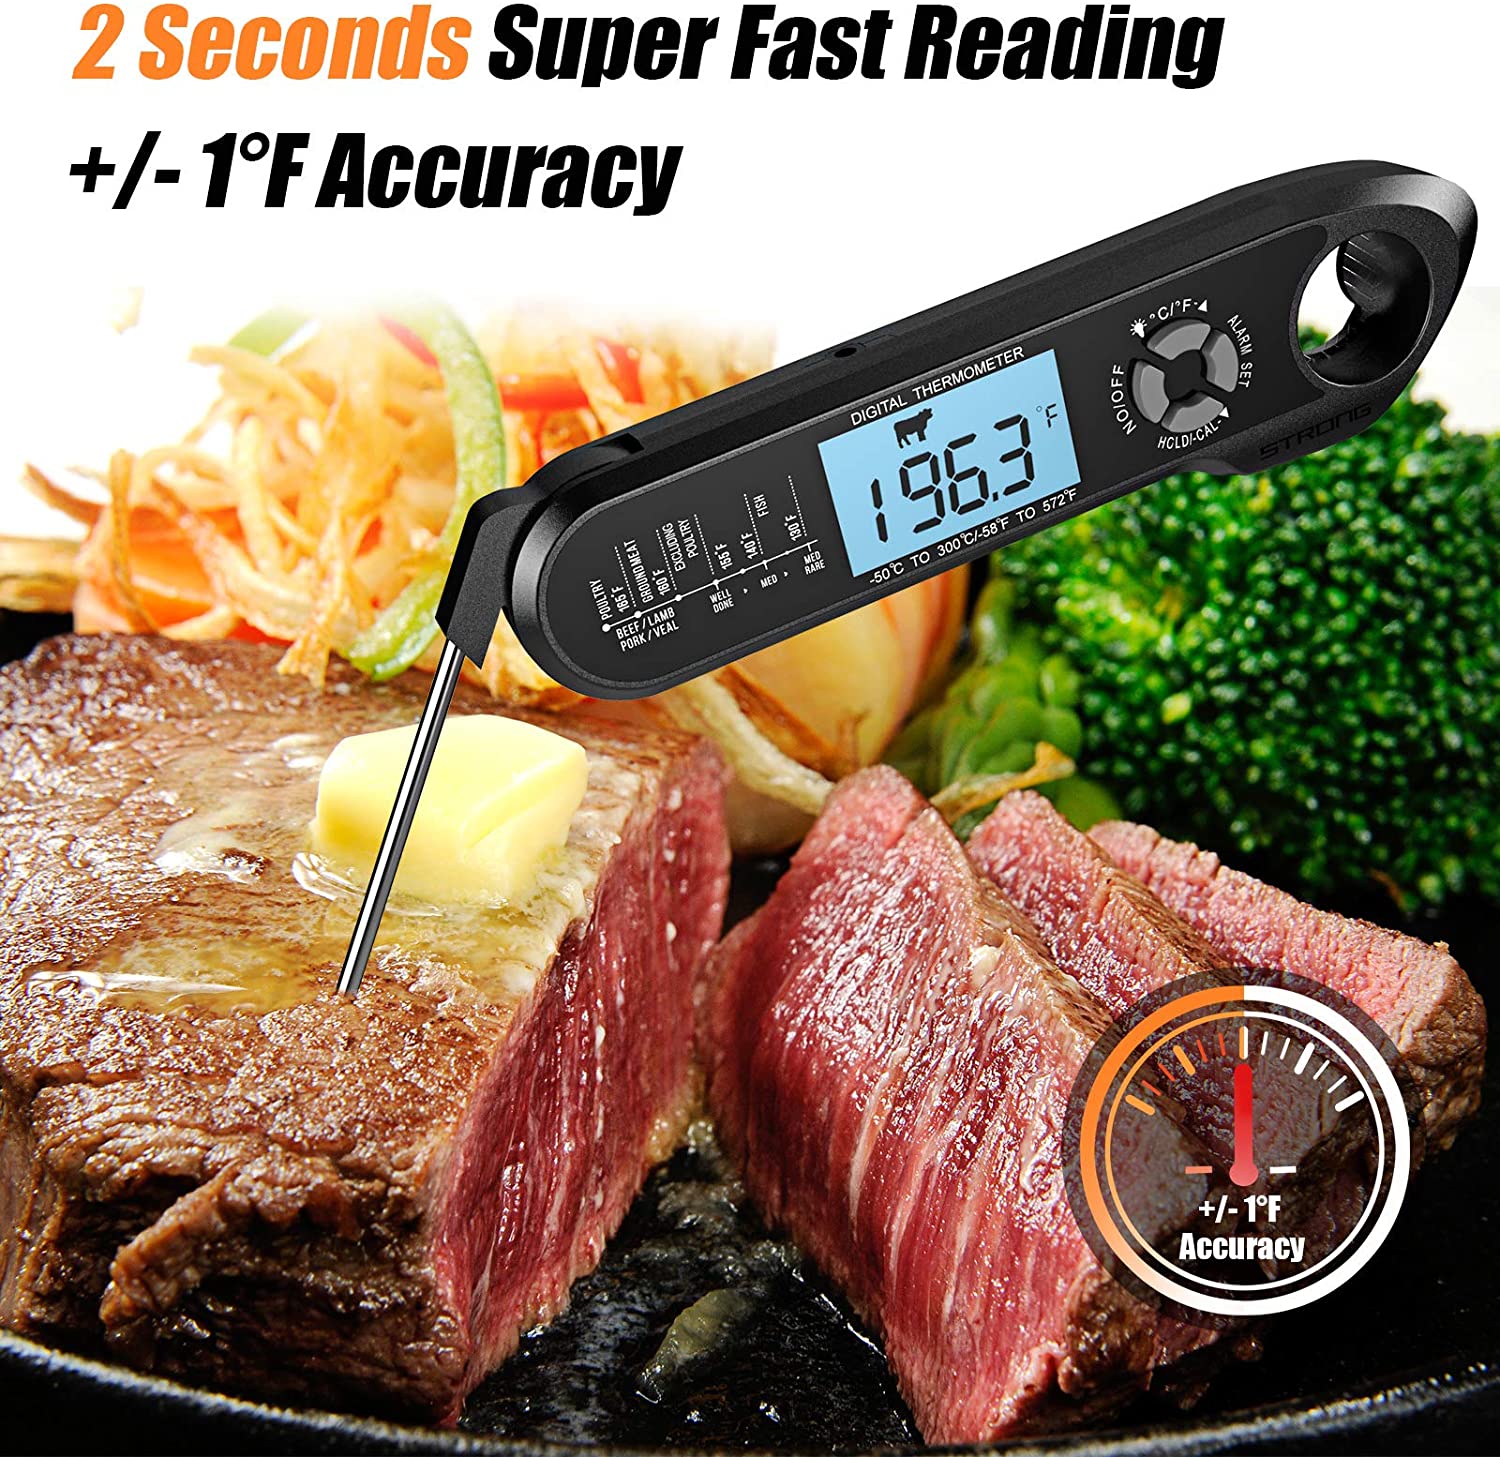 Meat Thermometer, 2 in 1 Meat Thermometer Instant Read, Digital Food Thermometer with Alarm Function Backlight for Cooking, Grilling, Smoking, Frying, Baking, Kitchen, Oven, Turkey, Steak (Red) - 副本